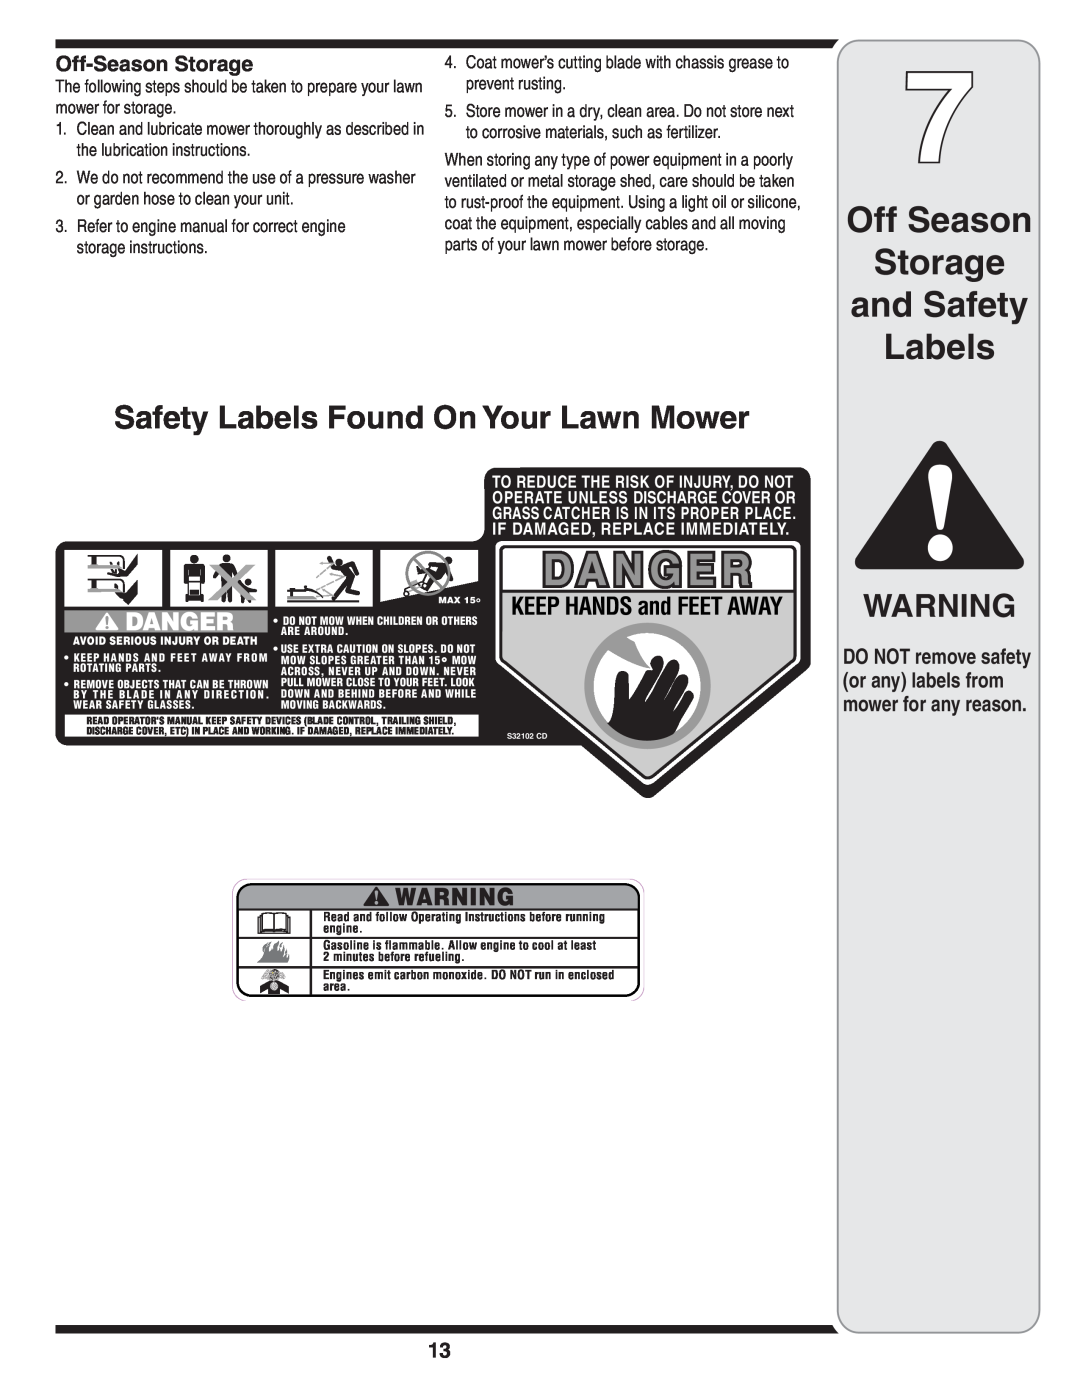 MTD 44M warranty Off Season Storage and Safety Labels, Safety Labels Found On Your Lawn Mower, Off-Season Storage 